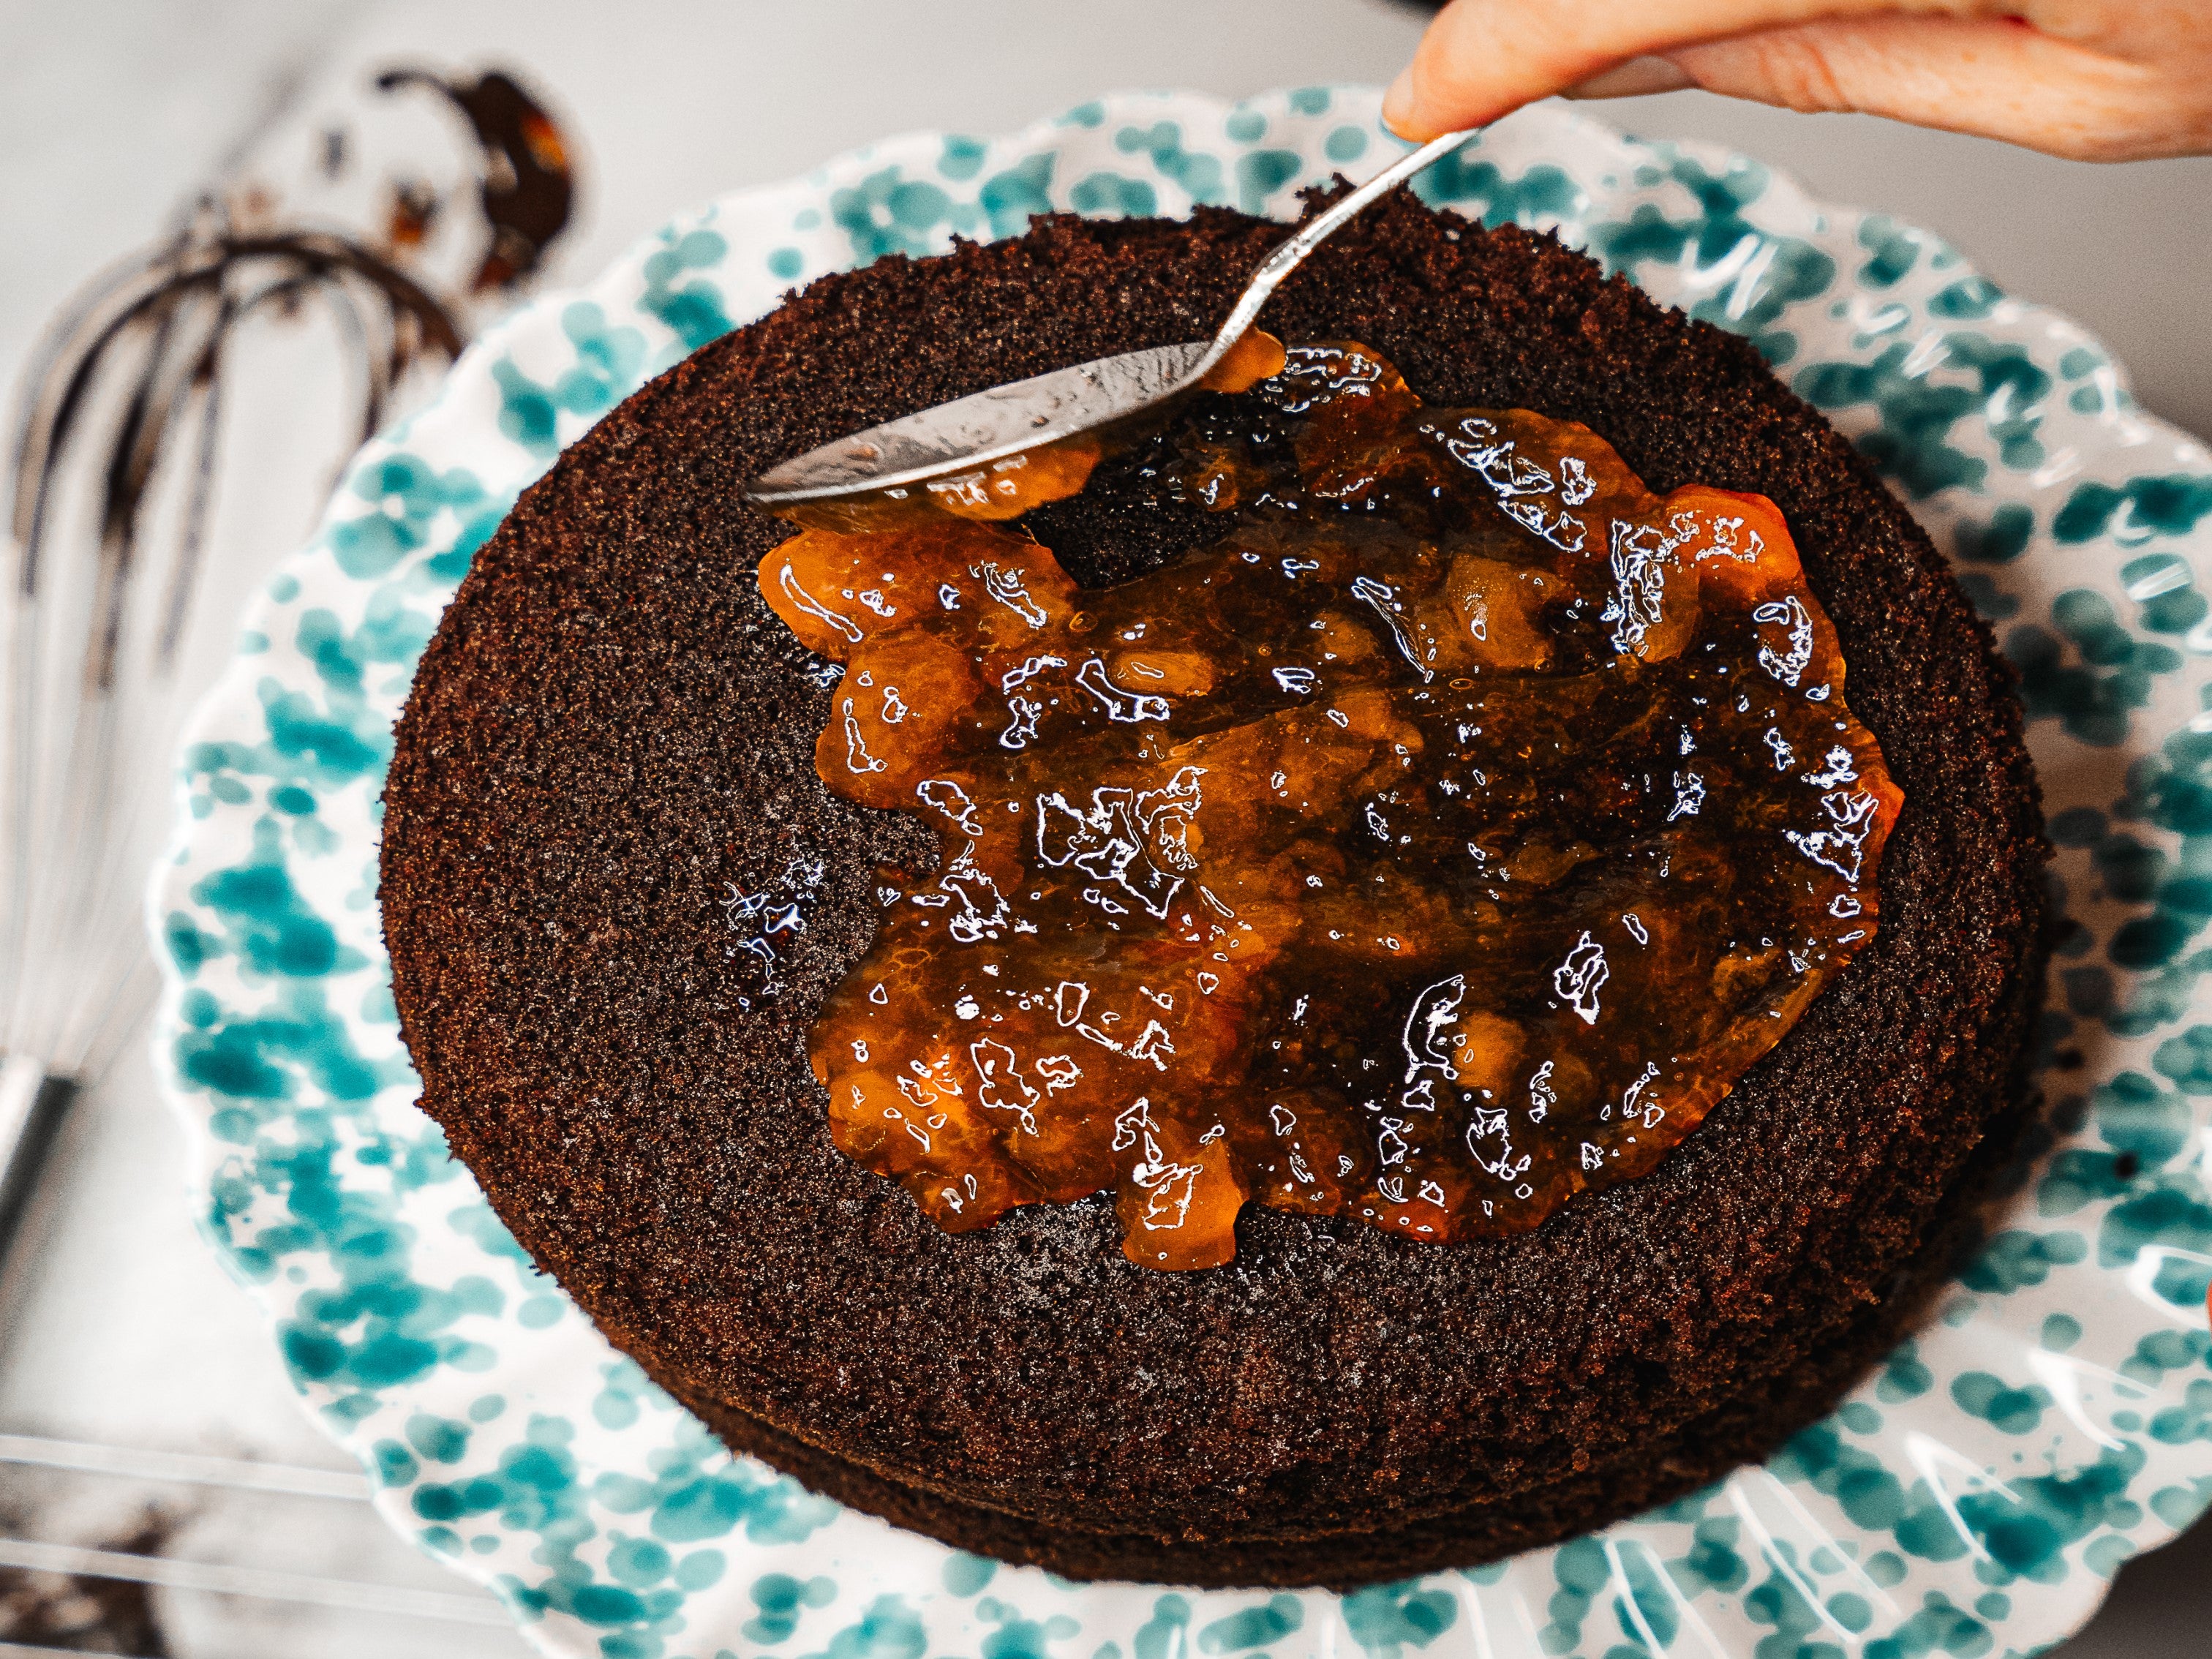 Spreading apricot jam over the middle layer of Mary Berry's chocolate cake